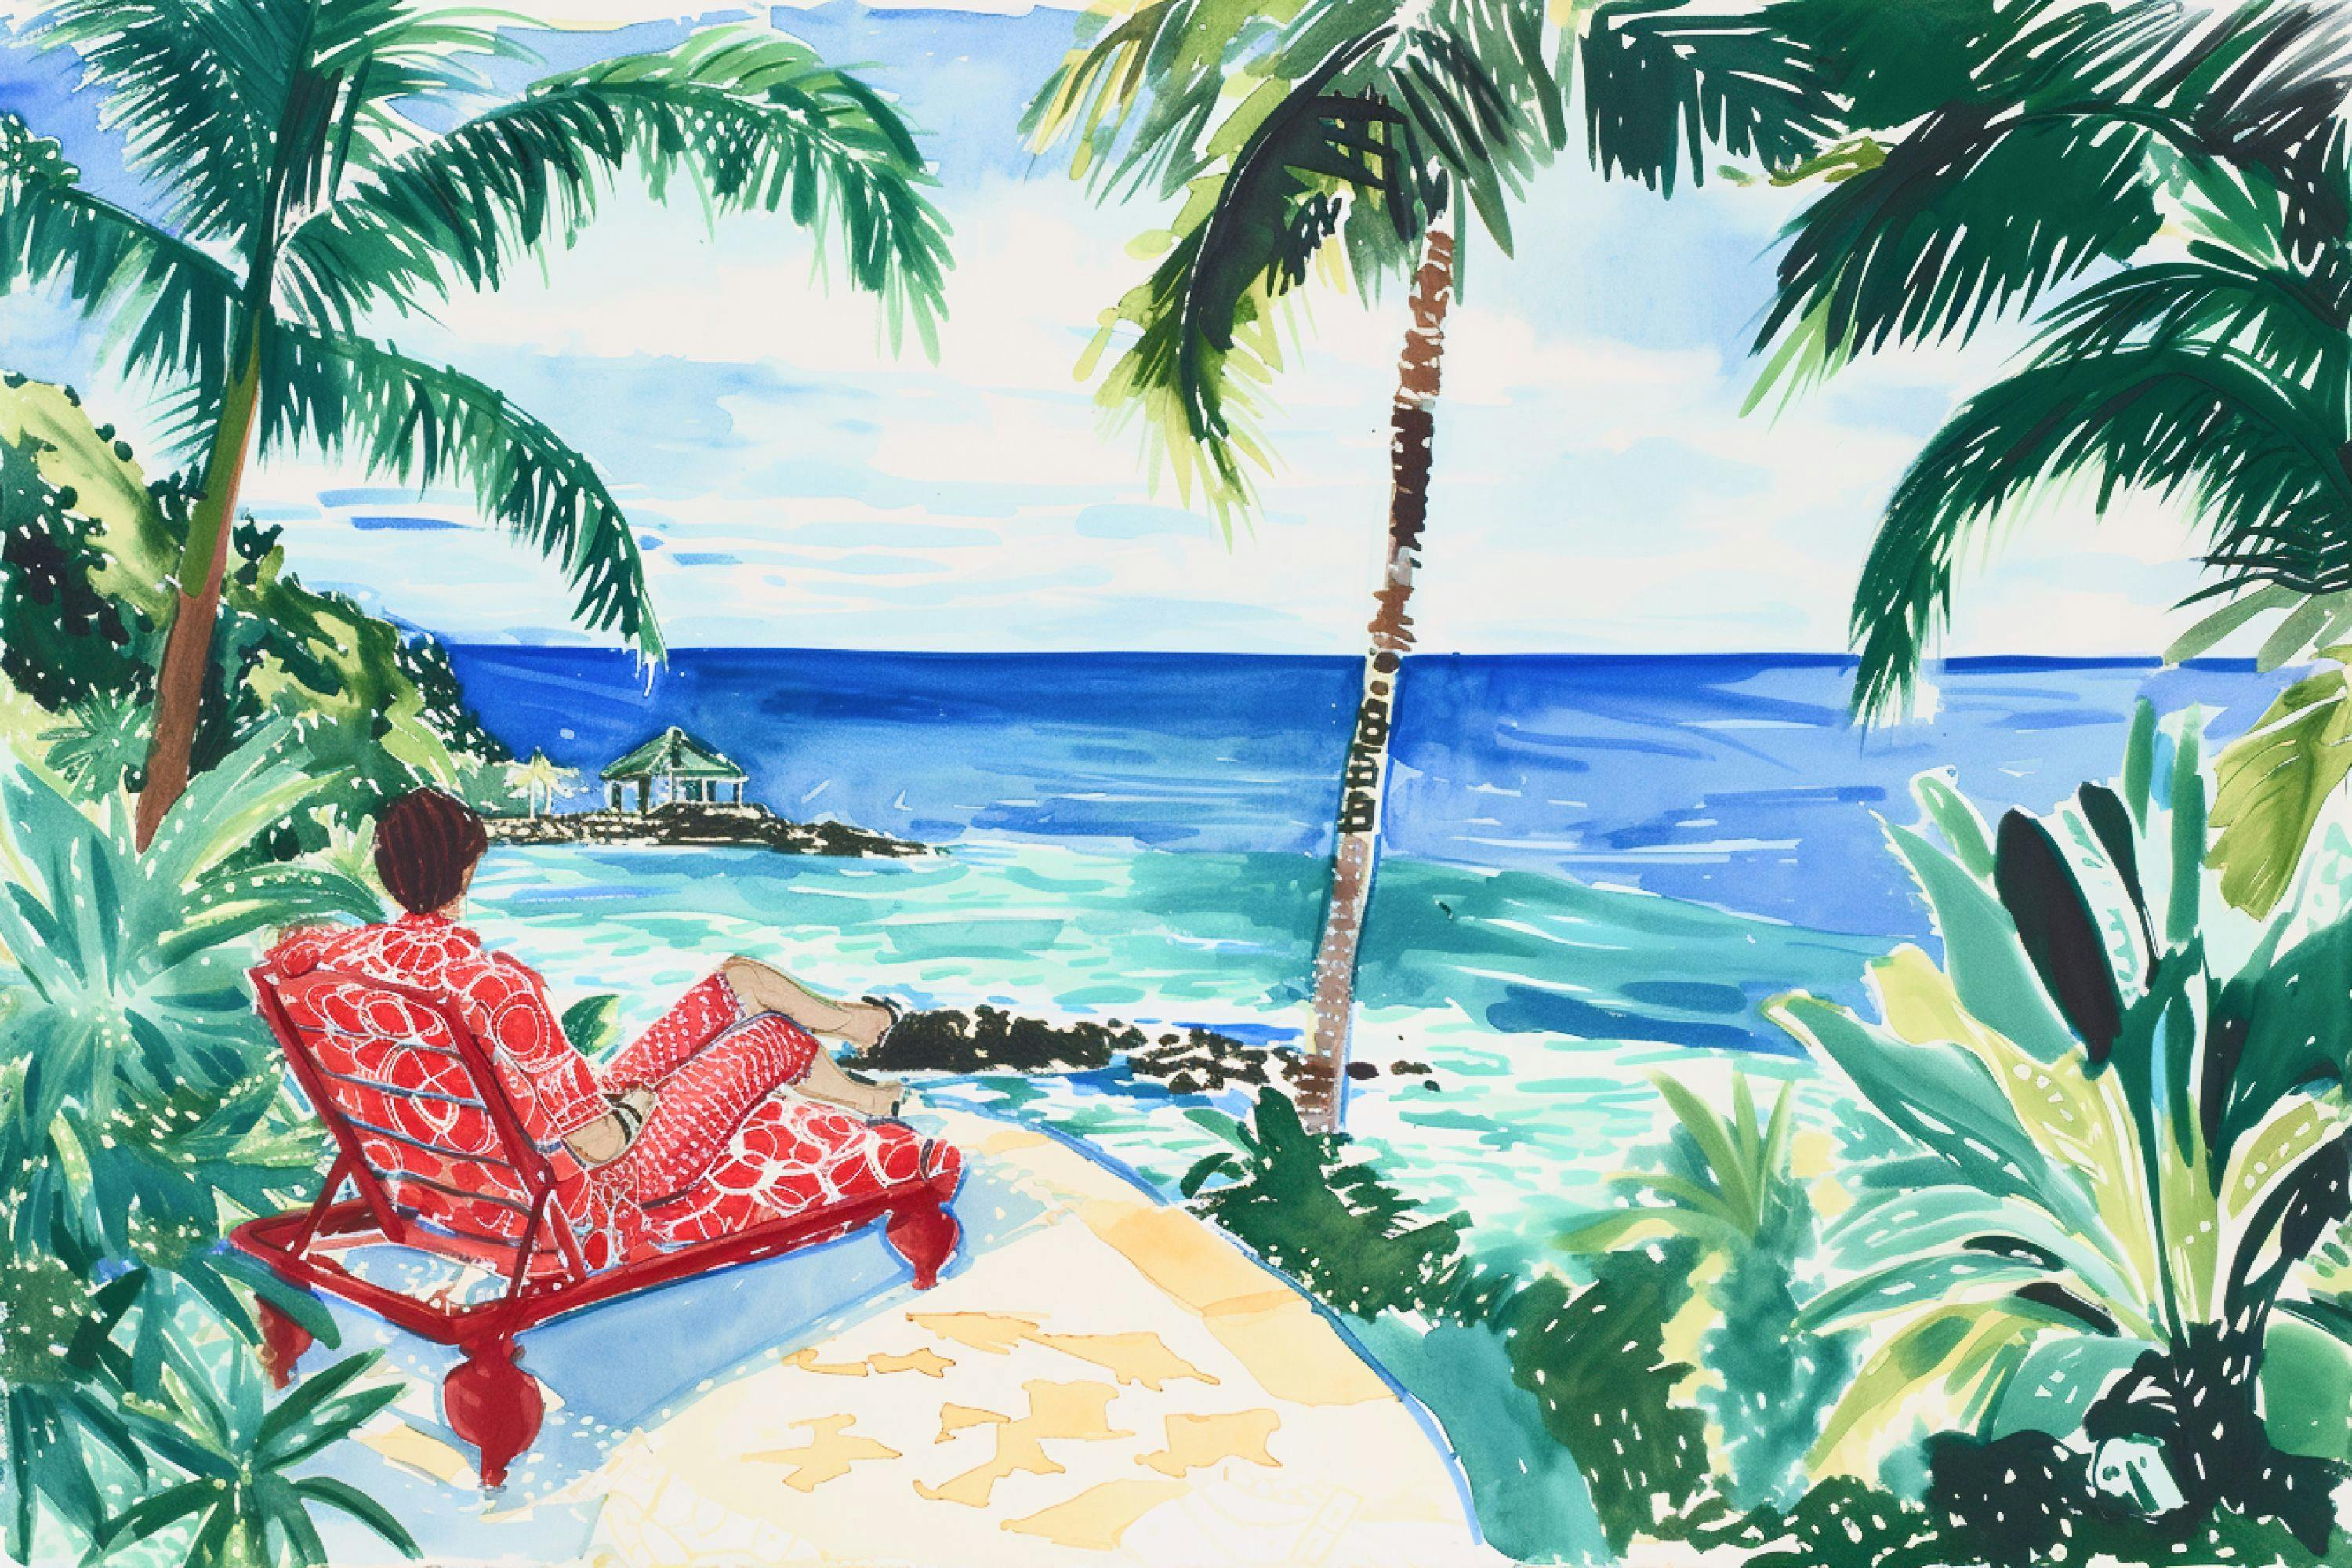 Illustration of a Person Lounging Under Palm Trees on a Beach